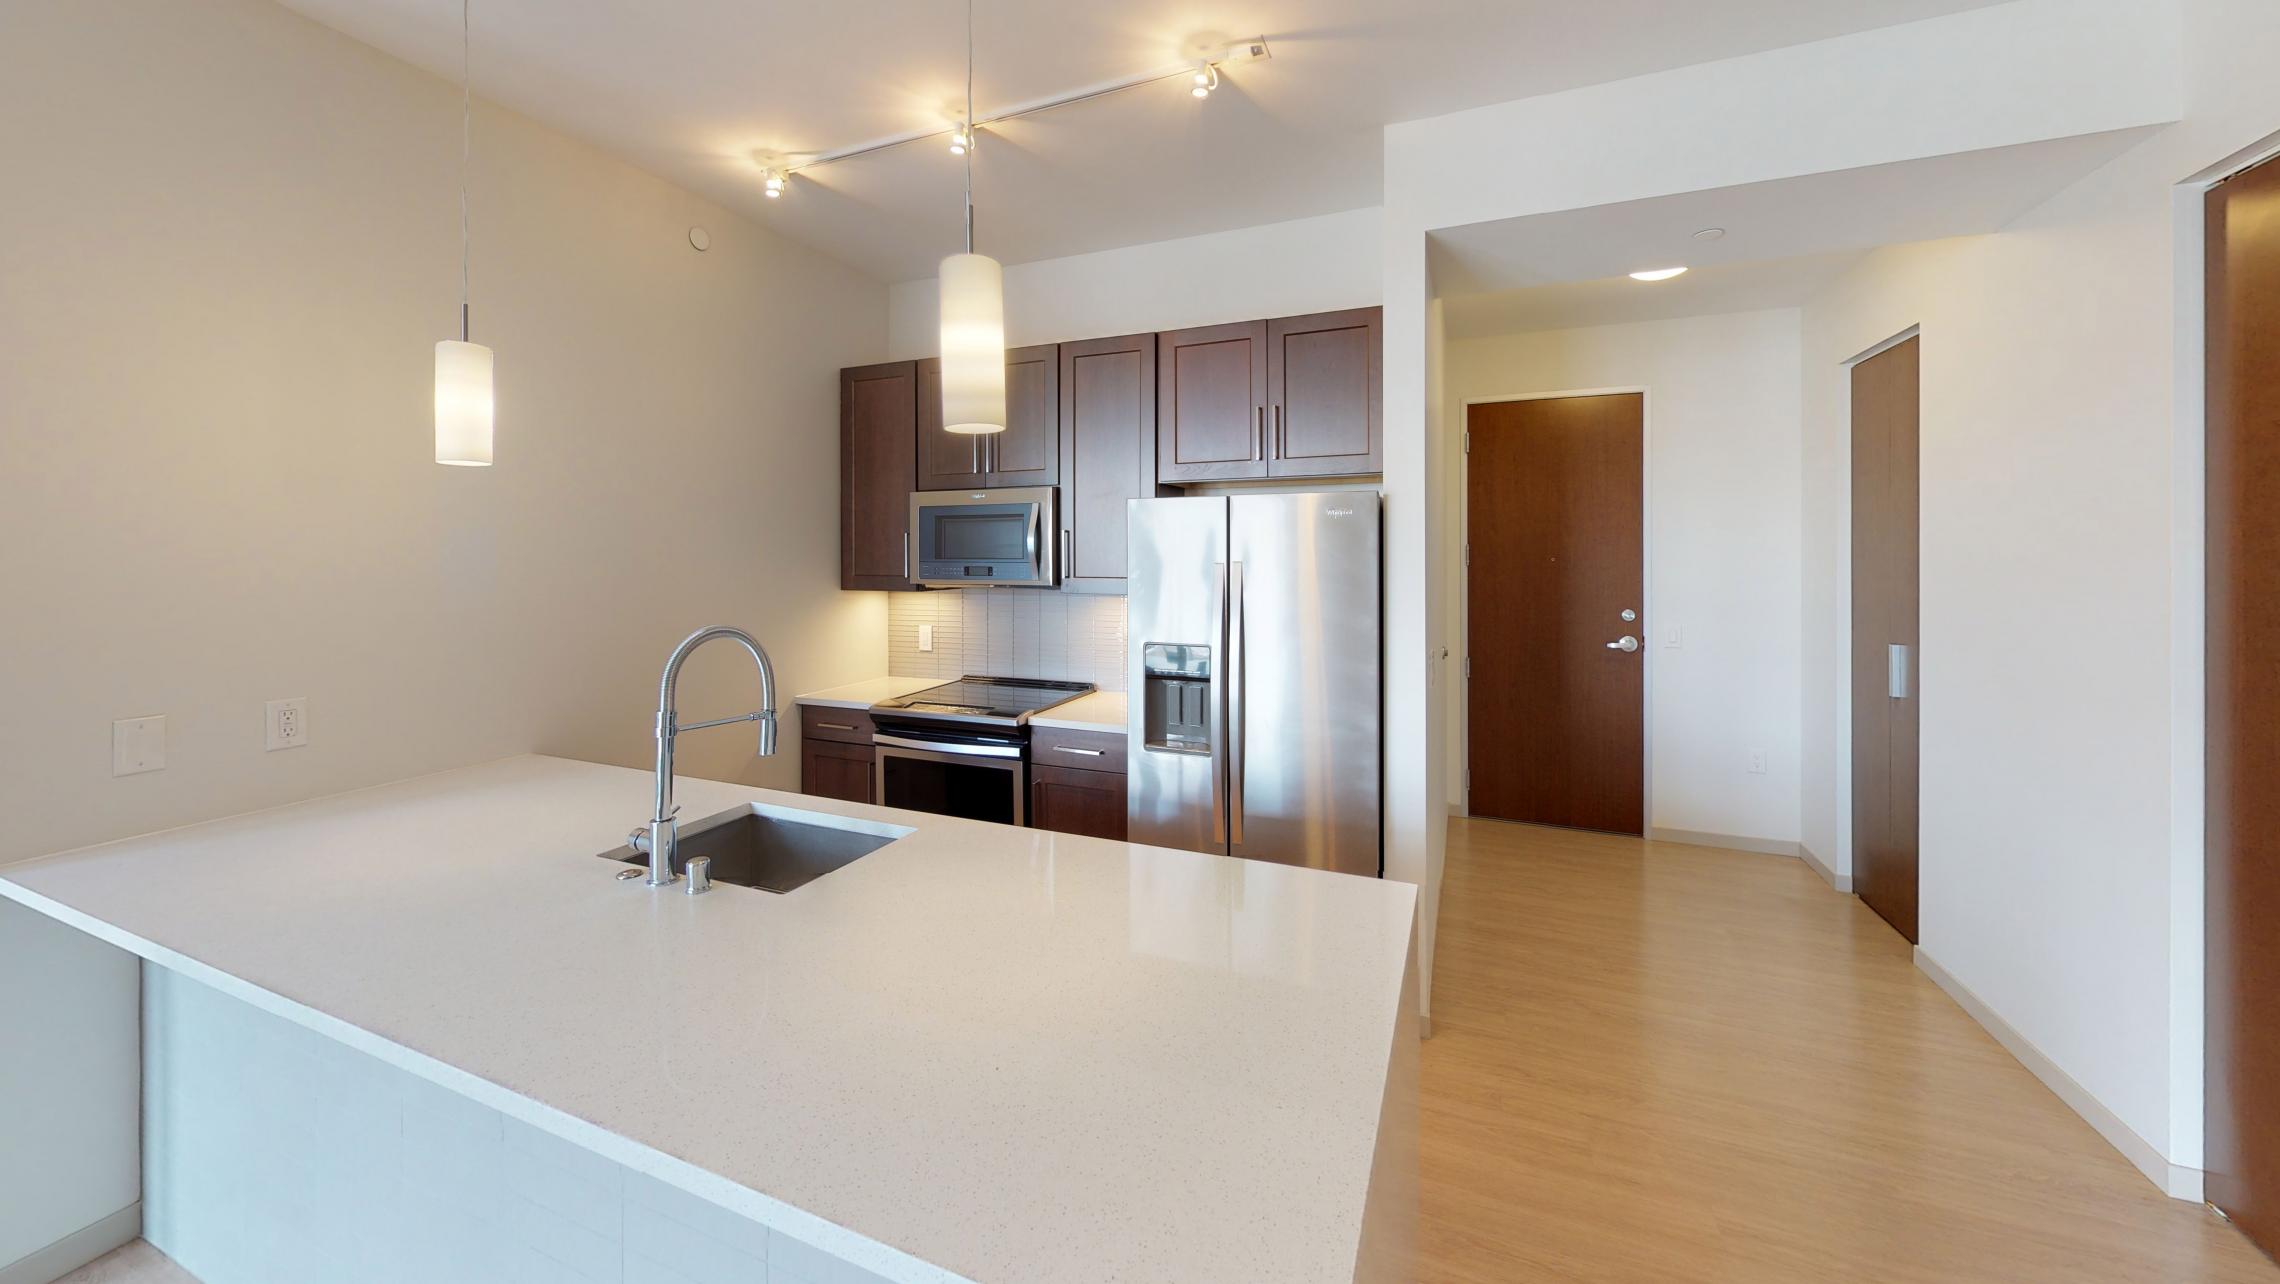 Pressman-Apartment-604-One-Bedroom-Balcony-City-View-Luxury-Downtown-Upscale-Modern-Downtown-Madison-Capitol-Square-Kitchen-Entrance.jpg